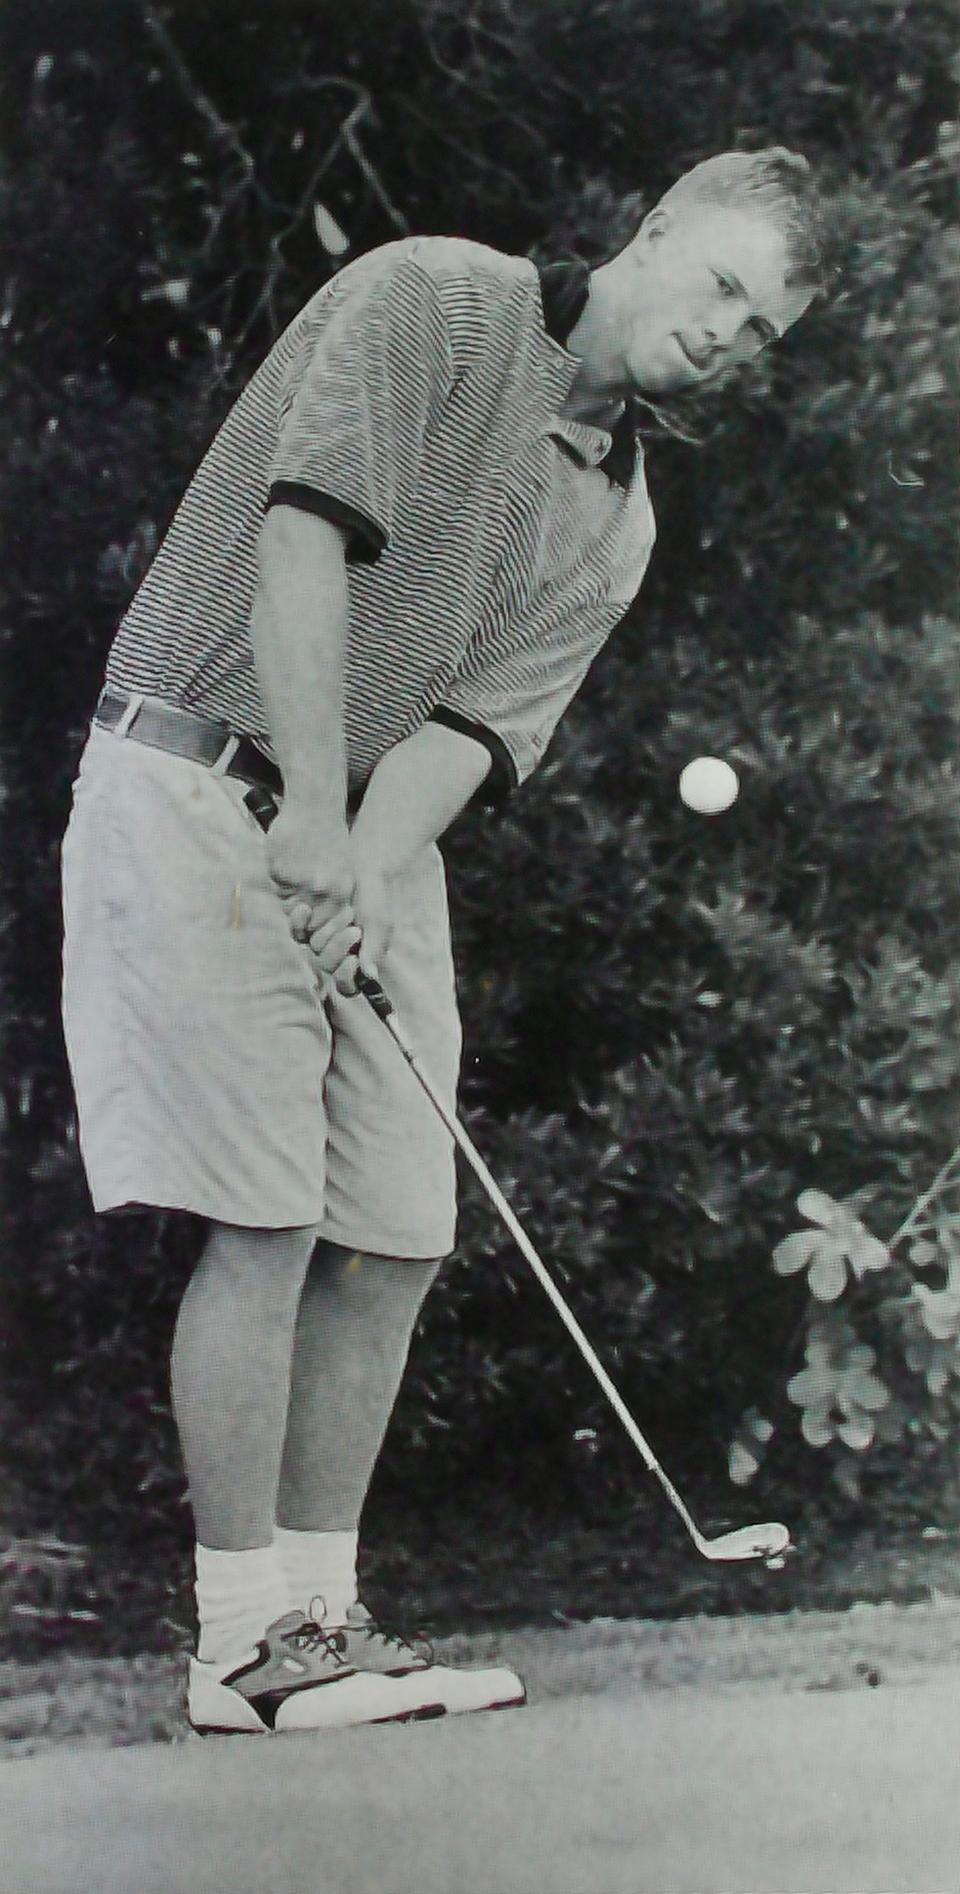 Scott Schroeder was noted for his distance off the tee and short game when he was recruited to play golf for the University of North Florida in 1994.